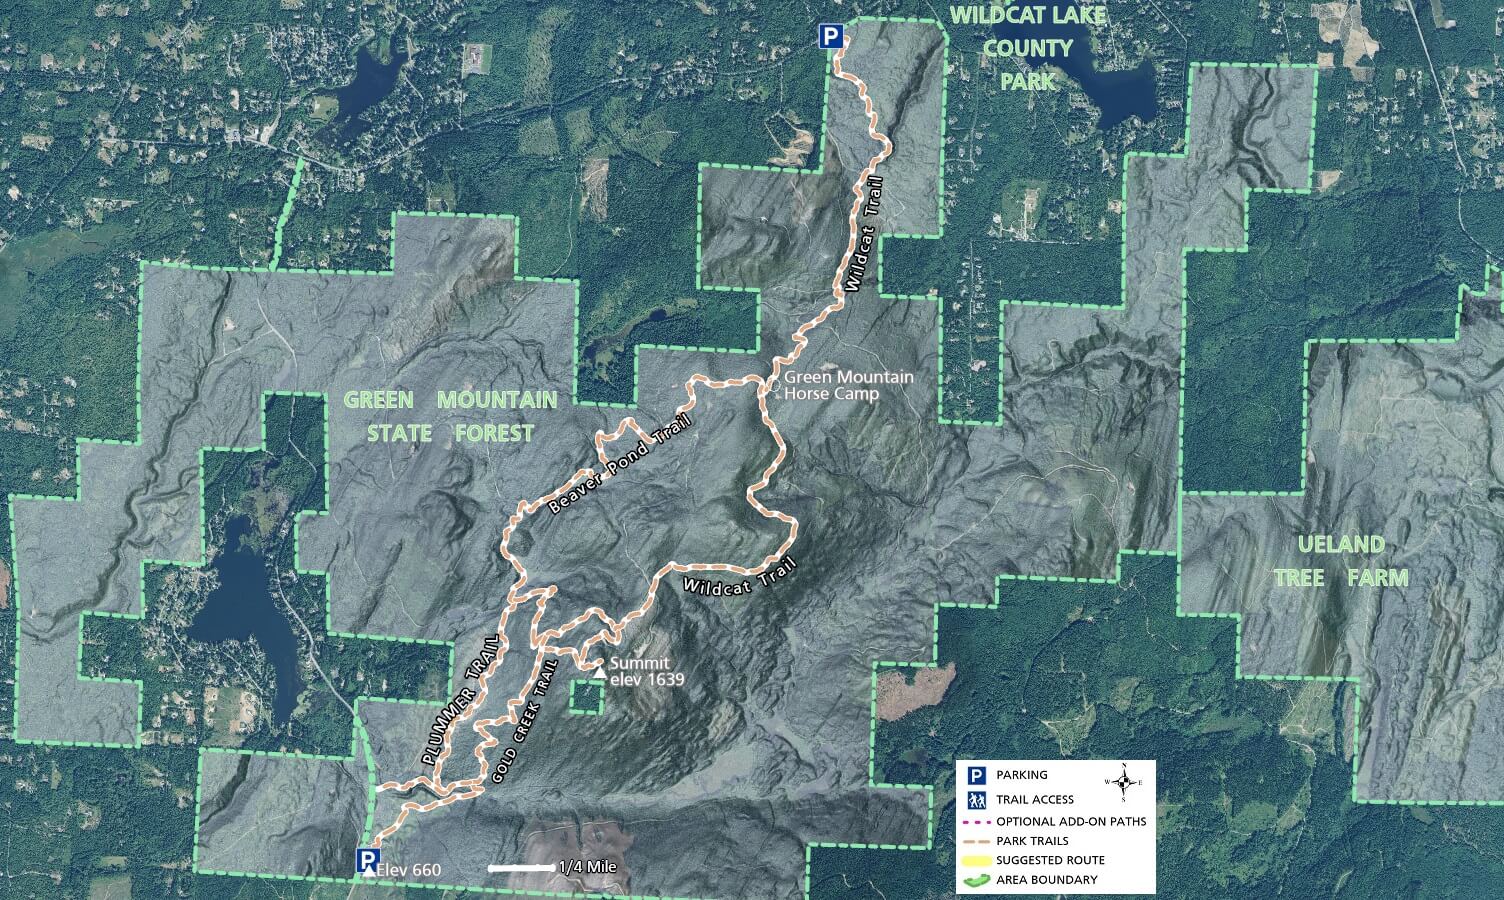 Green Mountain Trail Map - Imagery - Overview